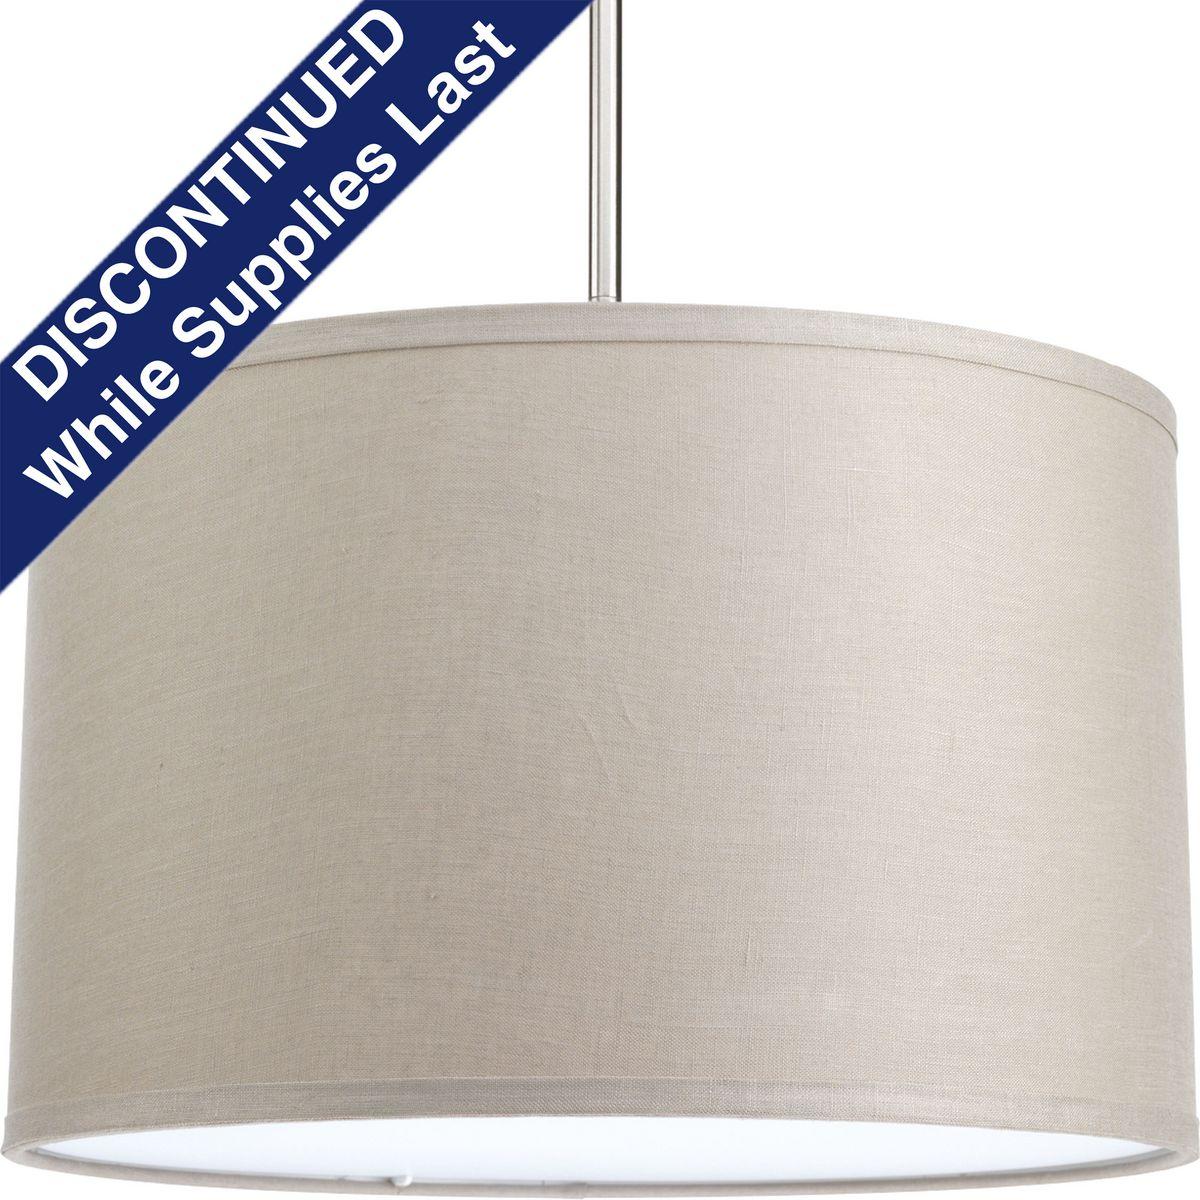 Hubbell P8829-56 The Markor Series is a modular pendant system. The versatile series allow the choice of shades and stem kits. This 16" shade with khaki fabric is inspired by mid-century design. Acrylic bottom diffuser. This shade can be used with a variety of stem kits f